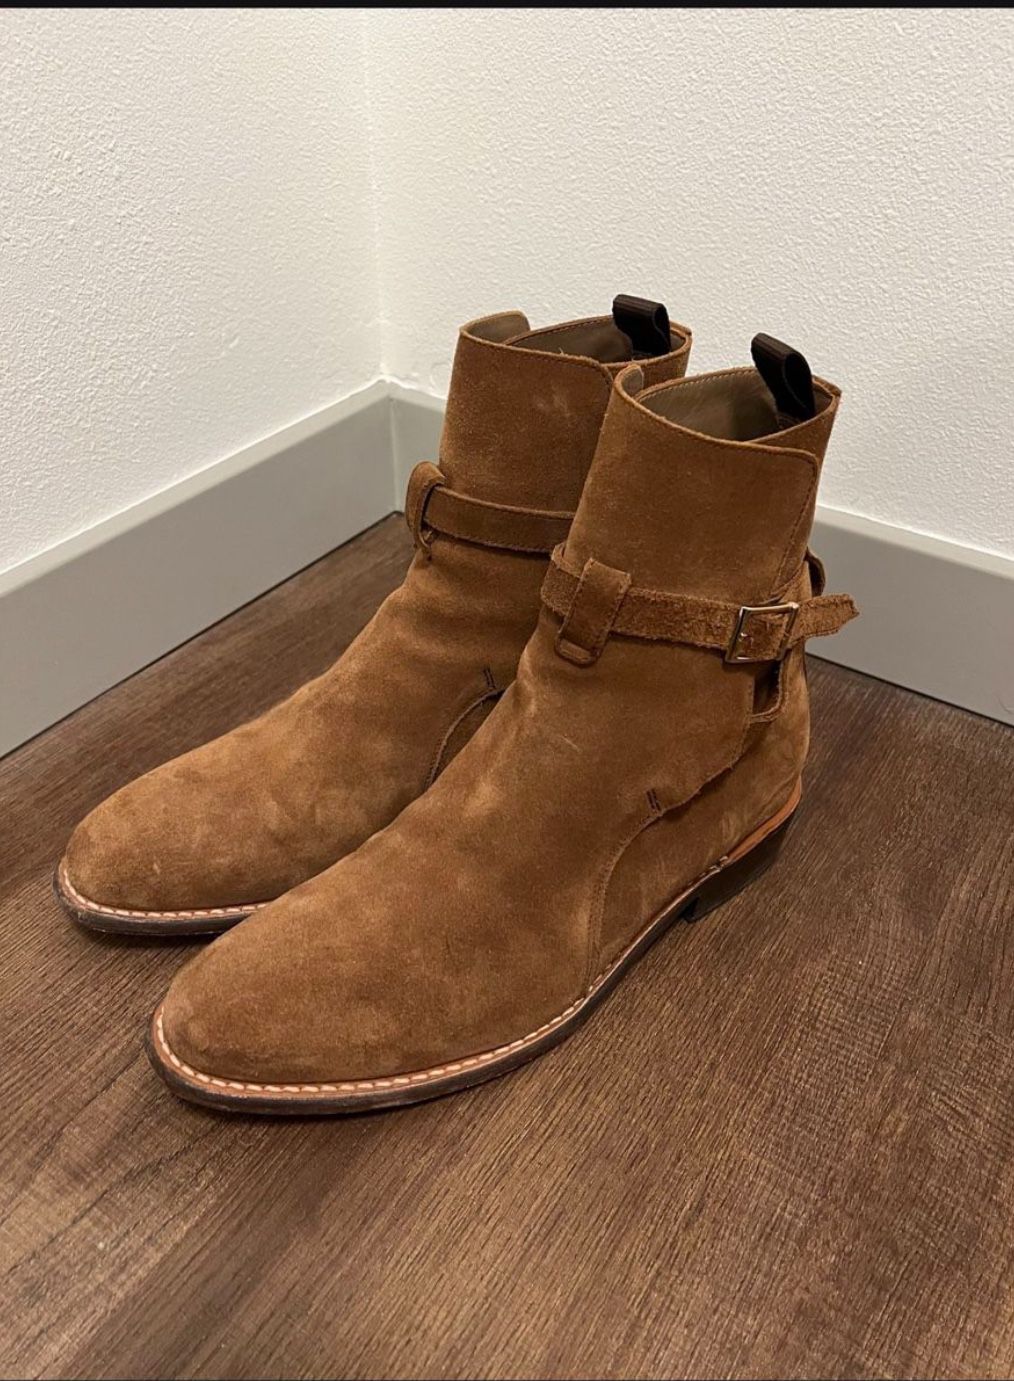 Handmade Suede Leather Boots